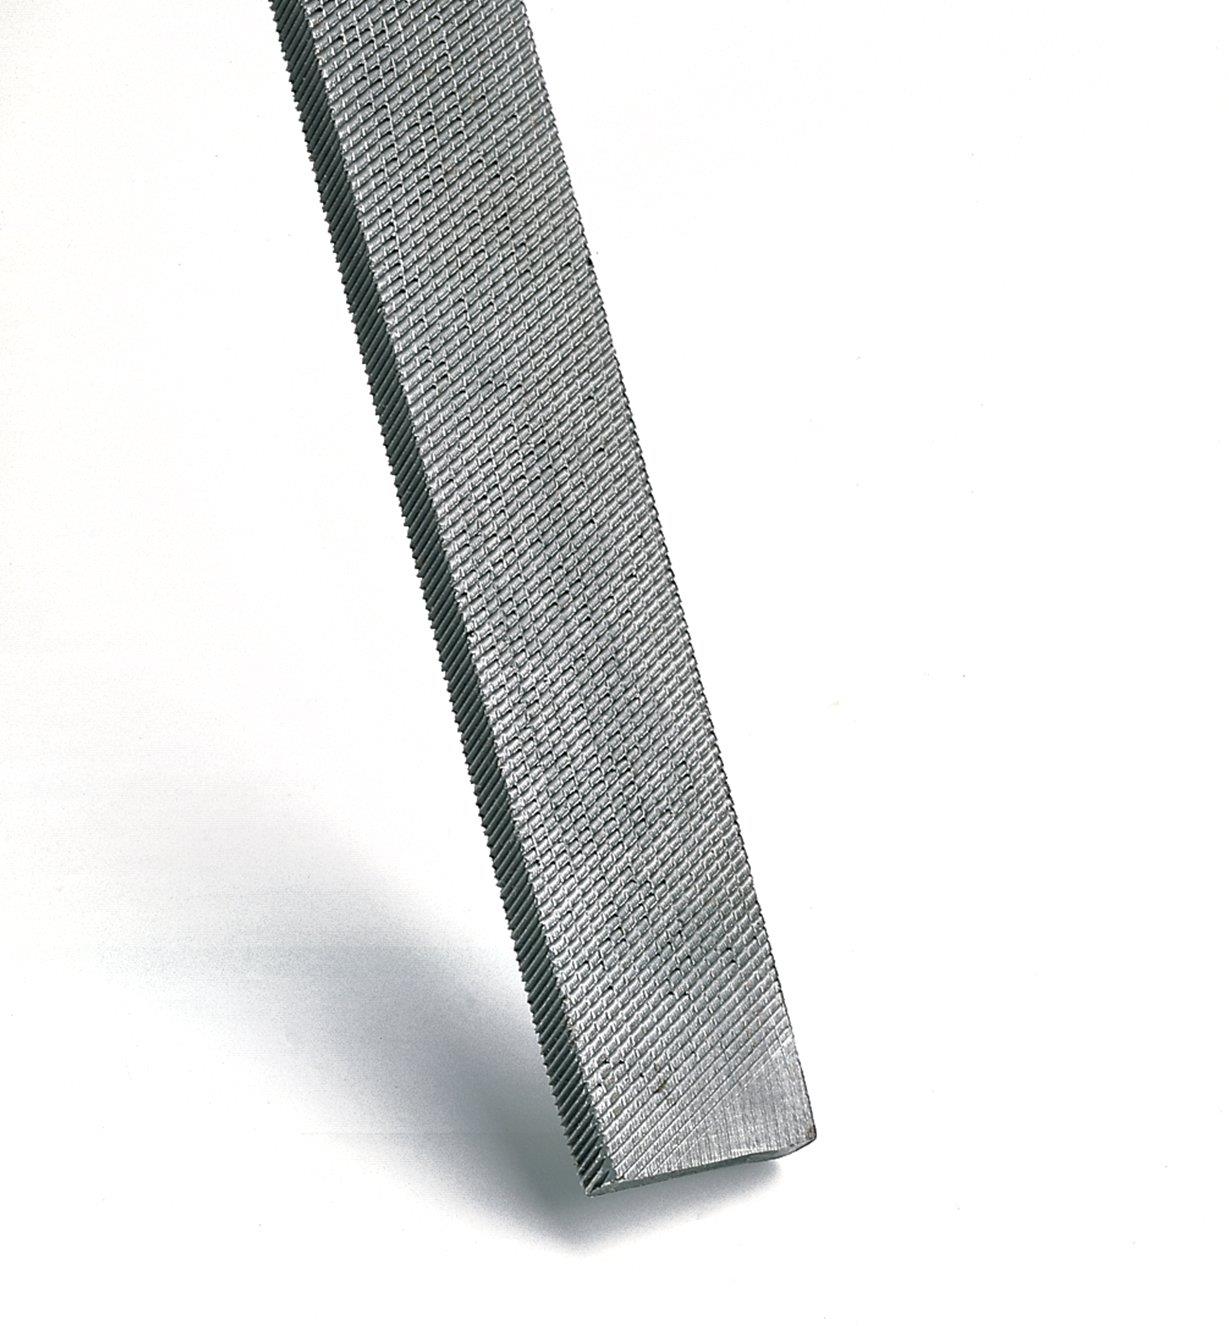 Close-up of Milled-Tooth File pattern